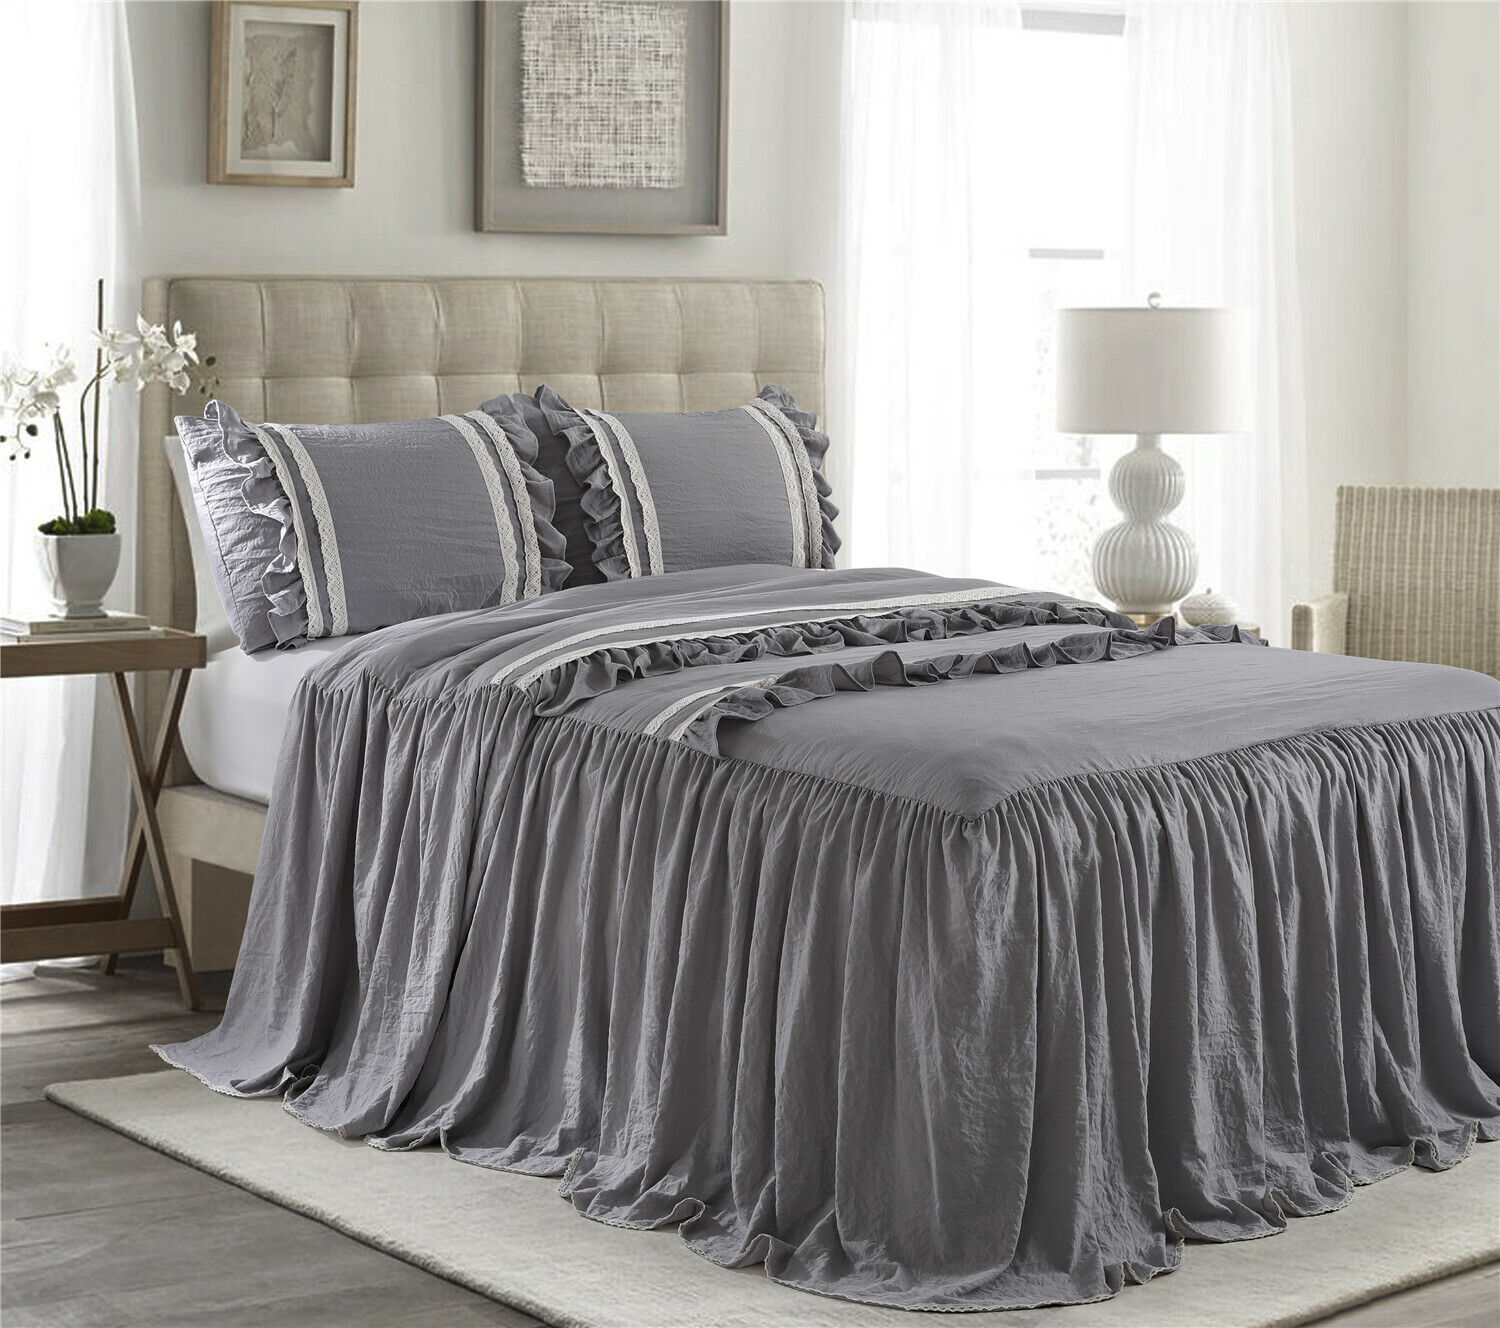 HIG 3 Piece EMMA Ruffle Skirt Bedspread Set 30 inches Drop Twin Queen King Size